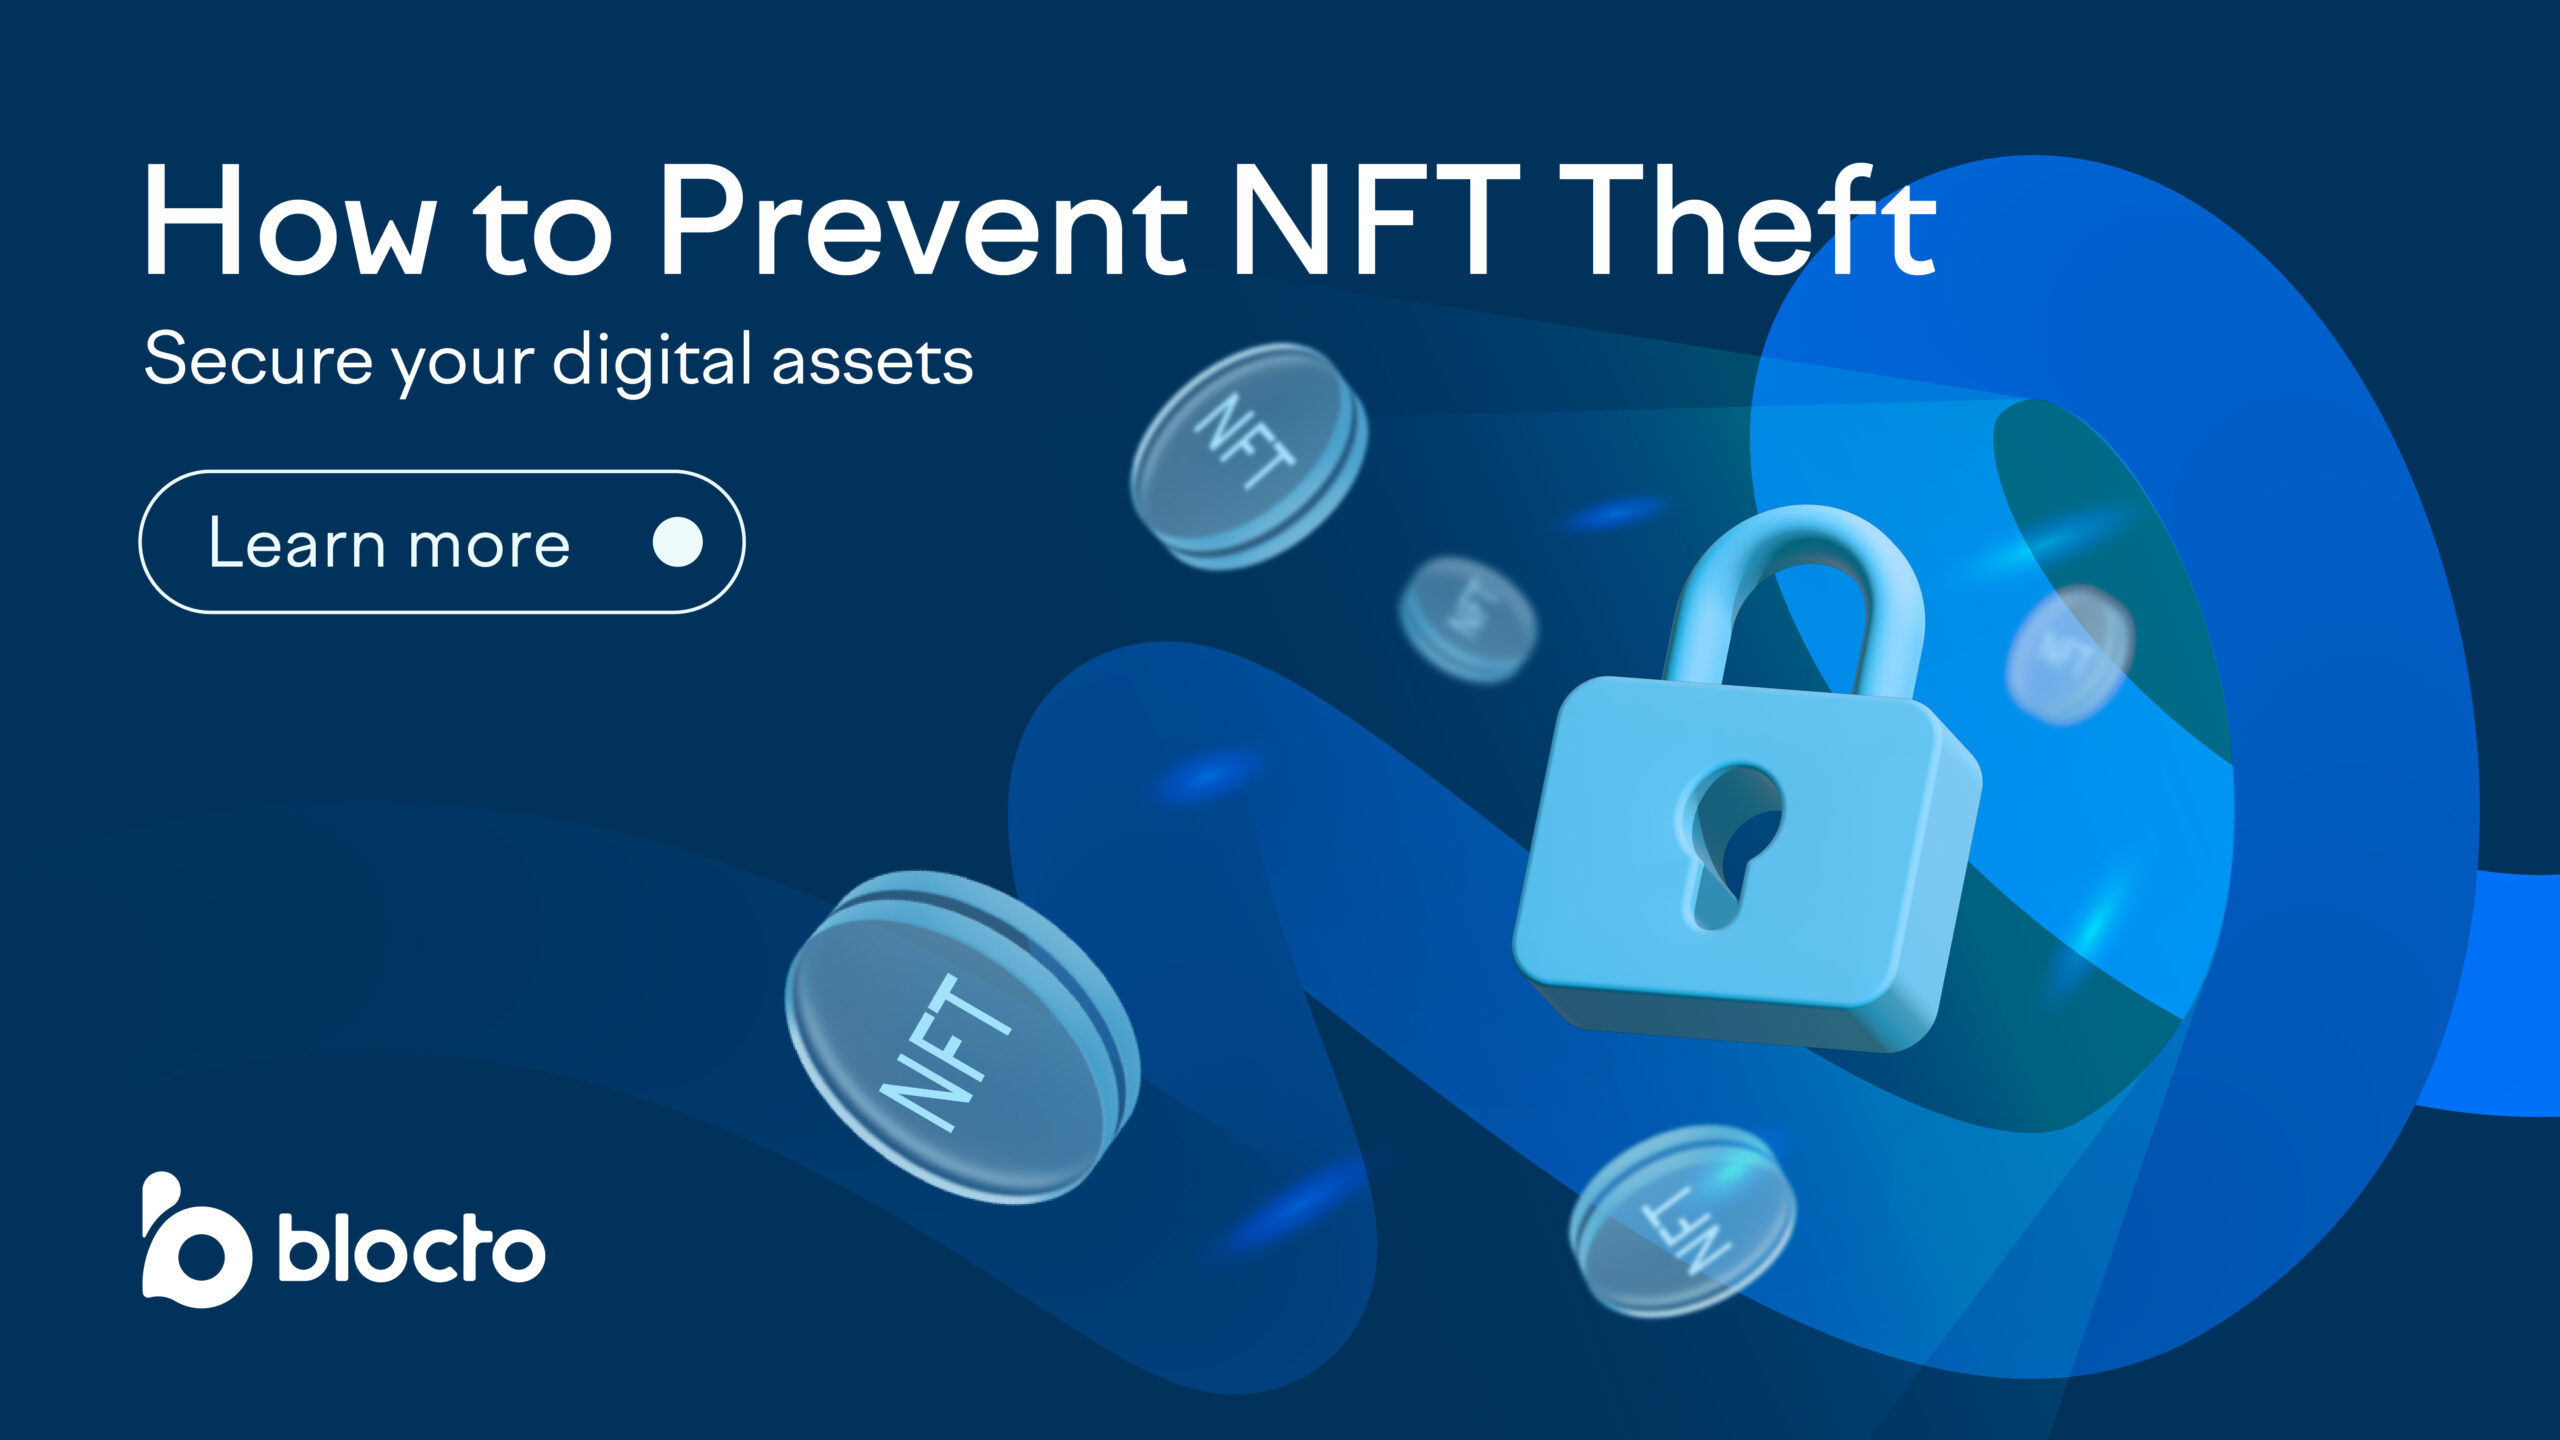 How to Prevent NFT Theft